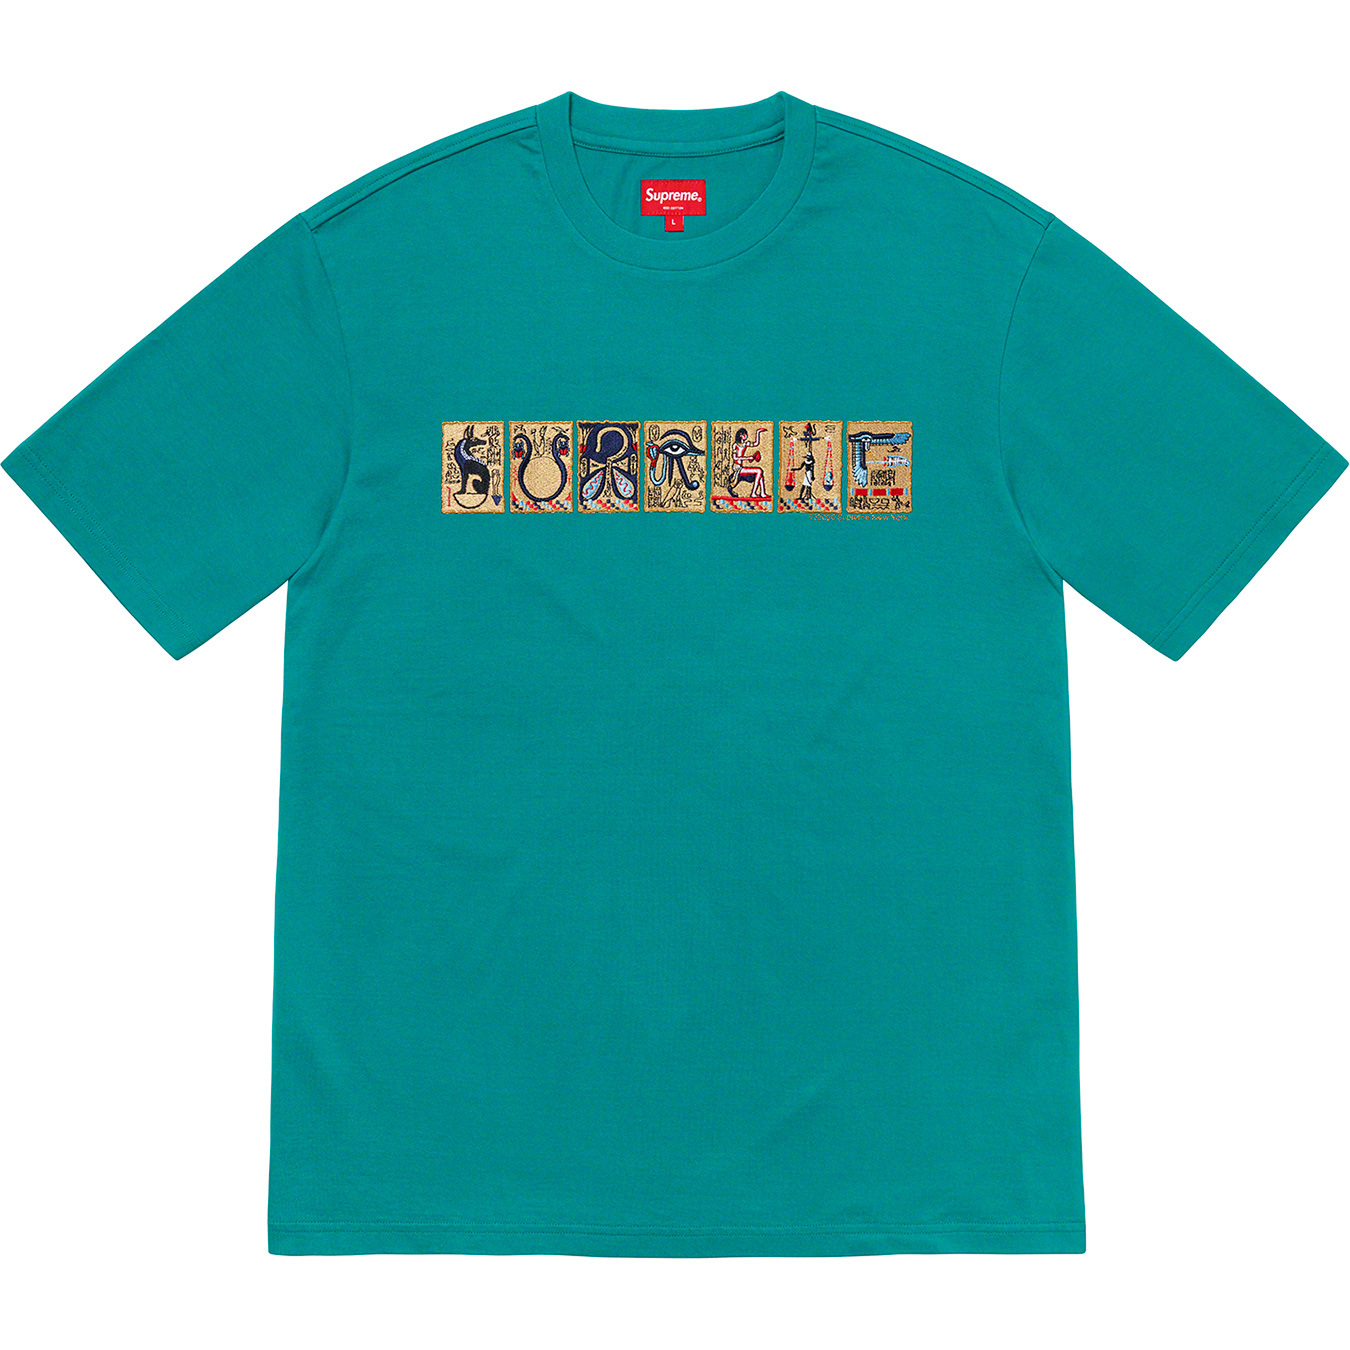 supreme ancient s/s top teal T-shirt